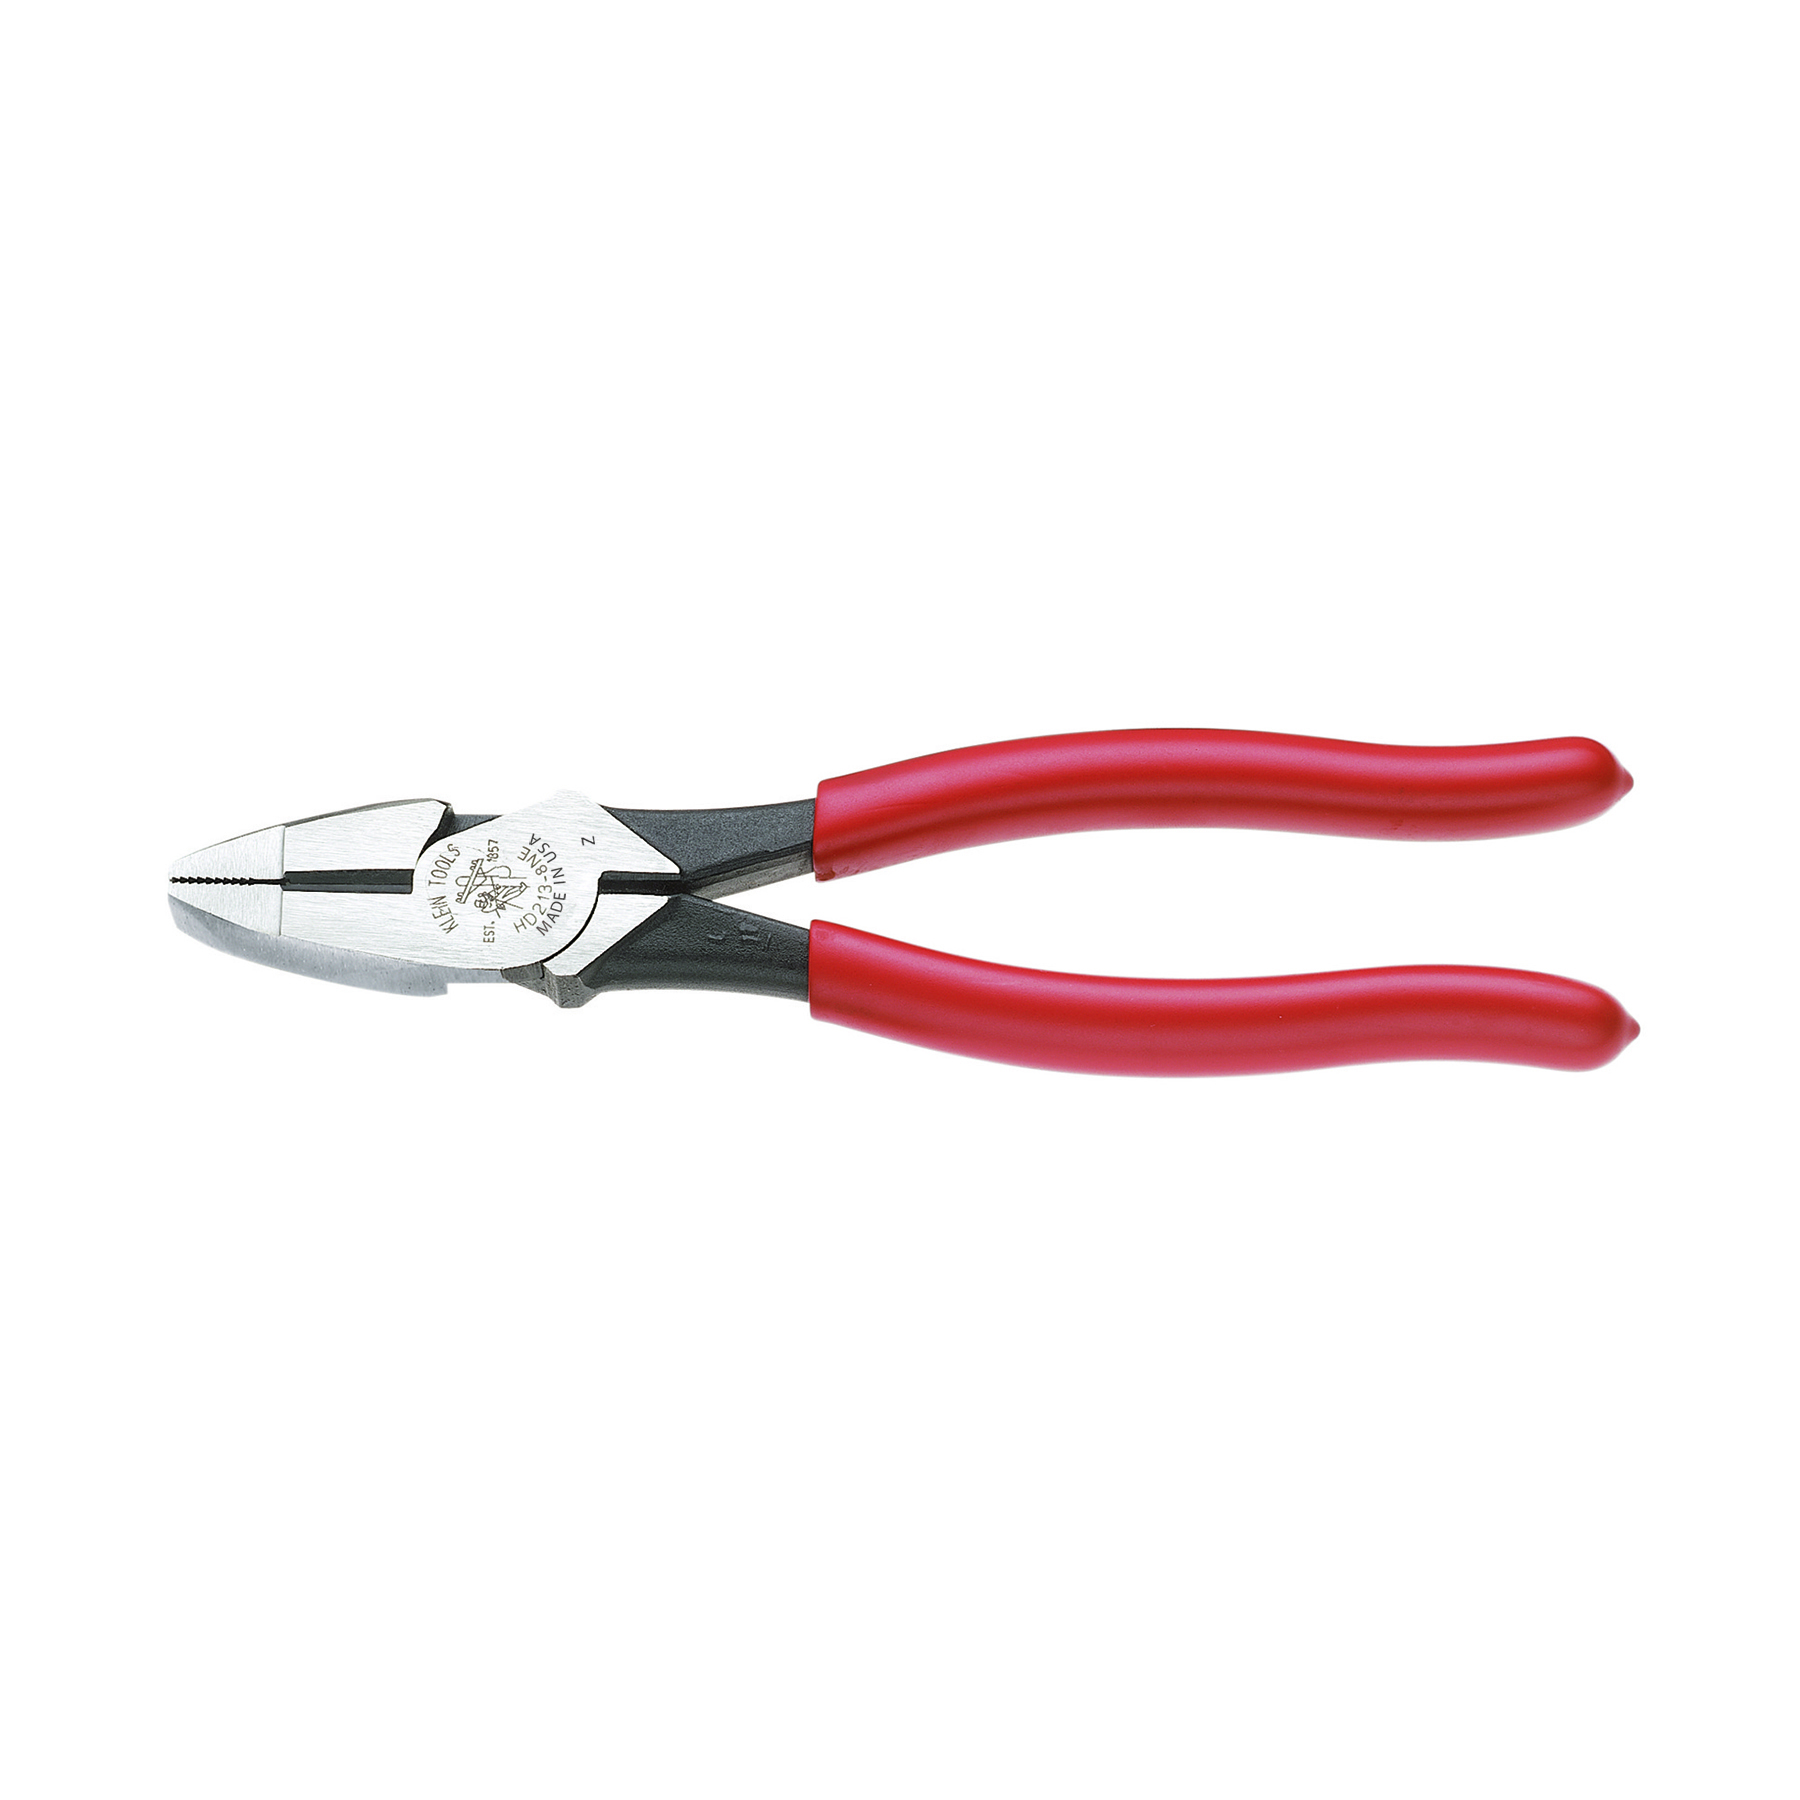 9' HIGH-LEVERAGE SIDE-CUTTING PLIERS